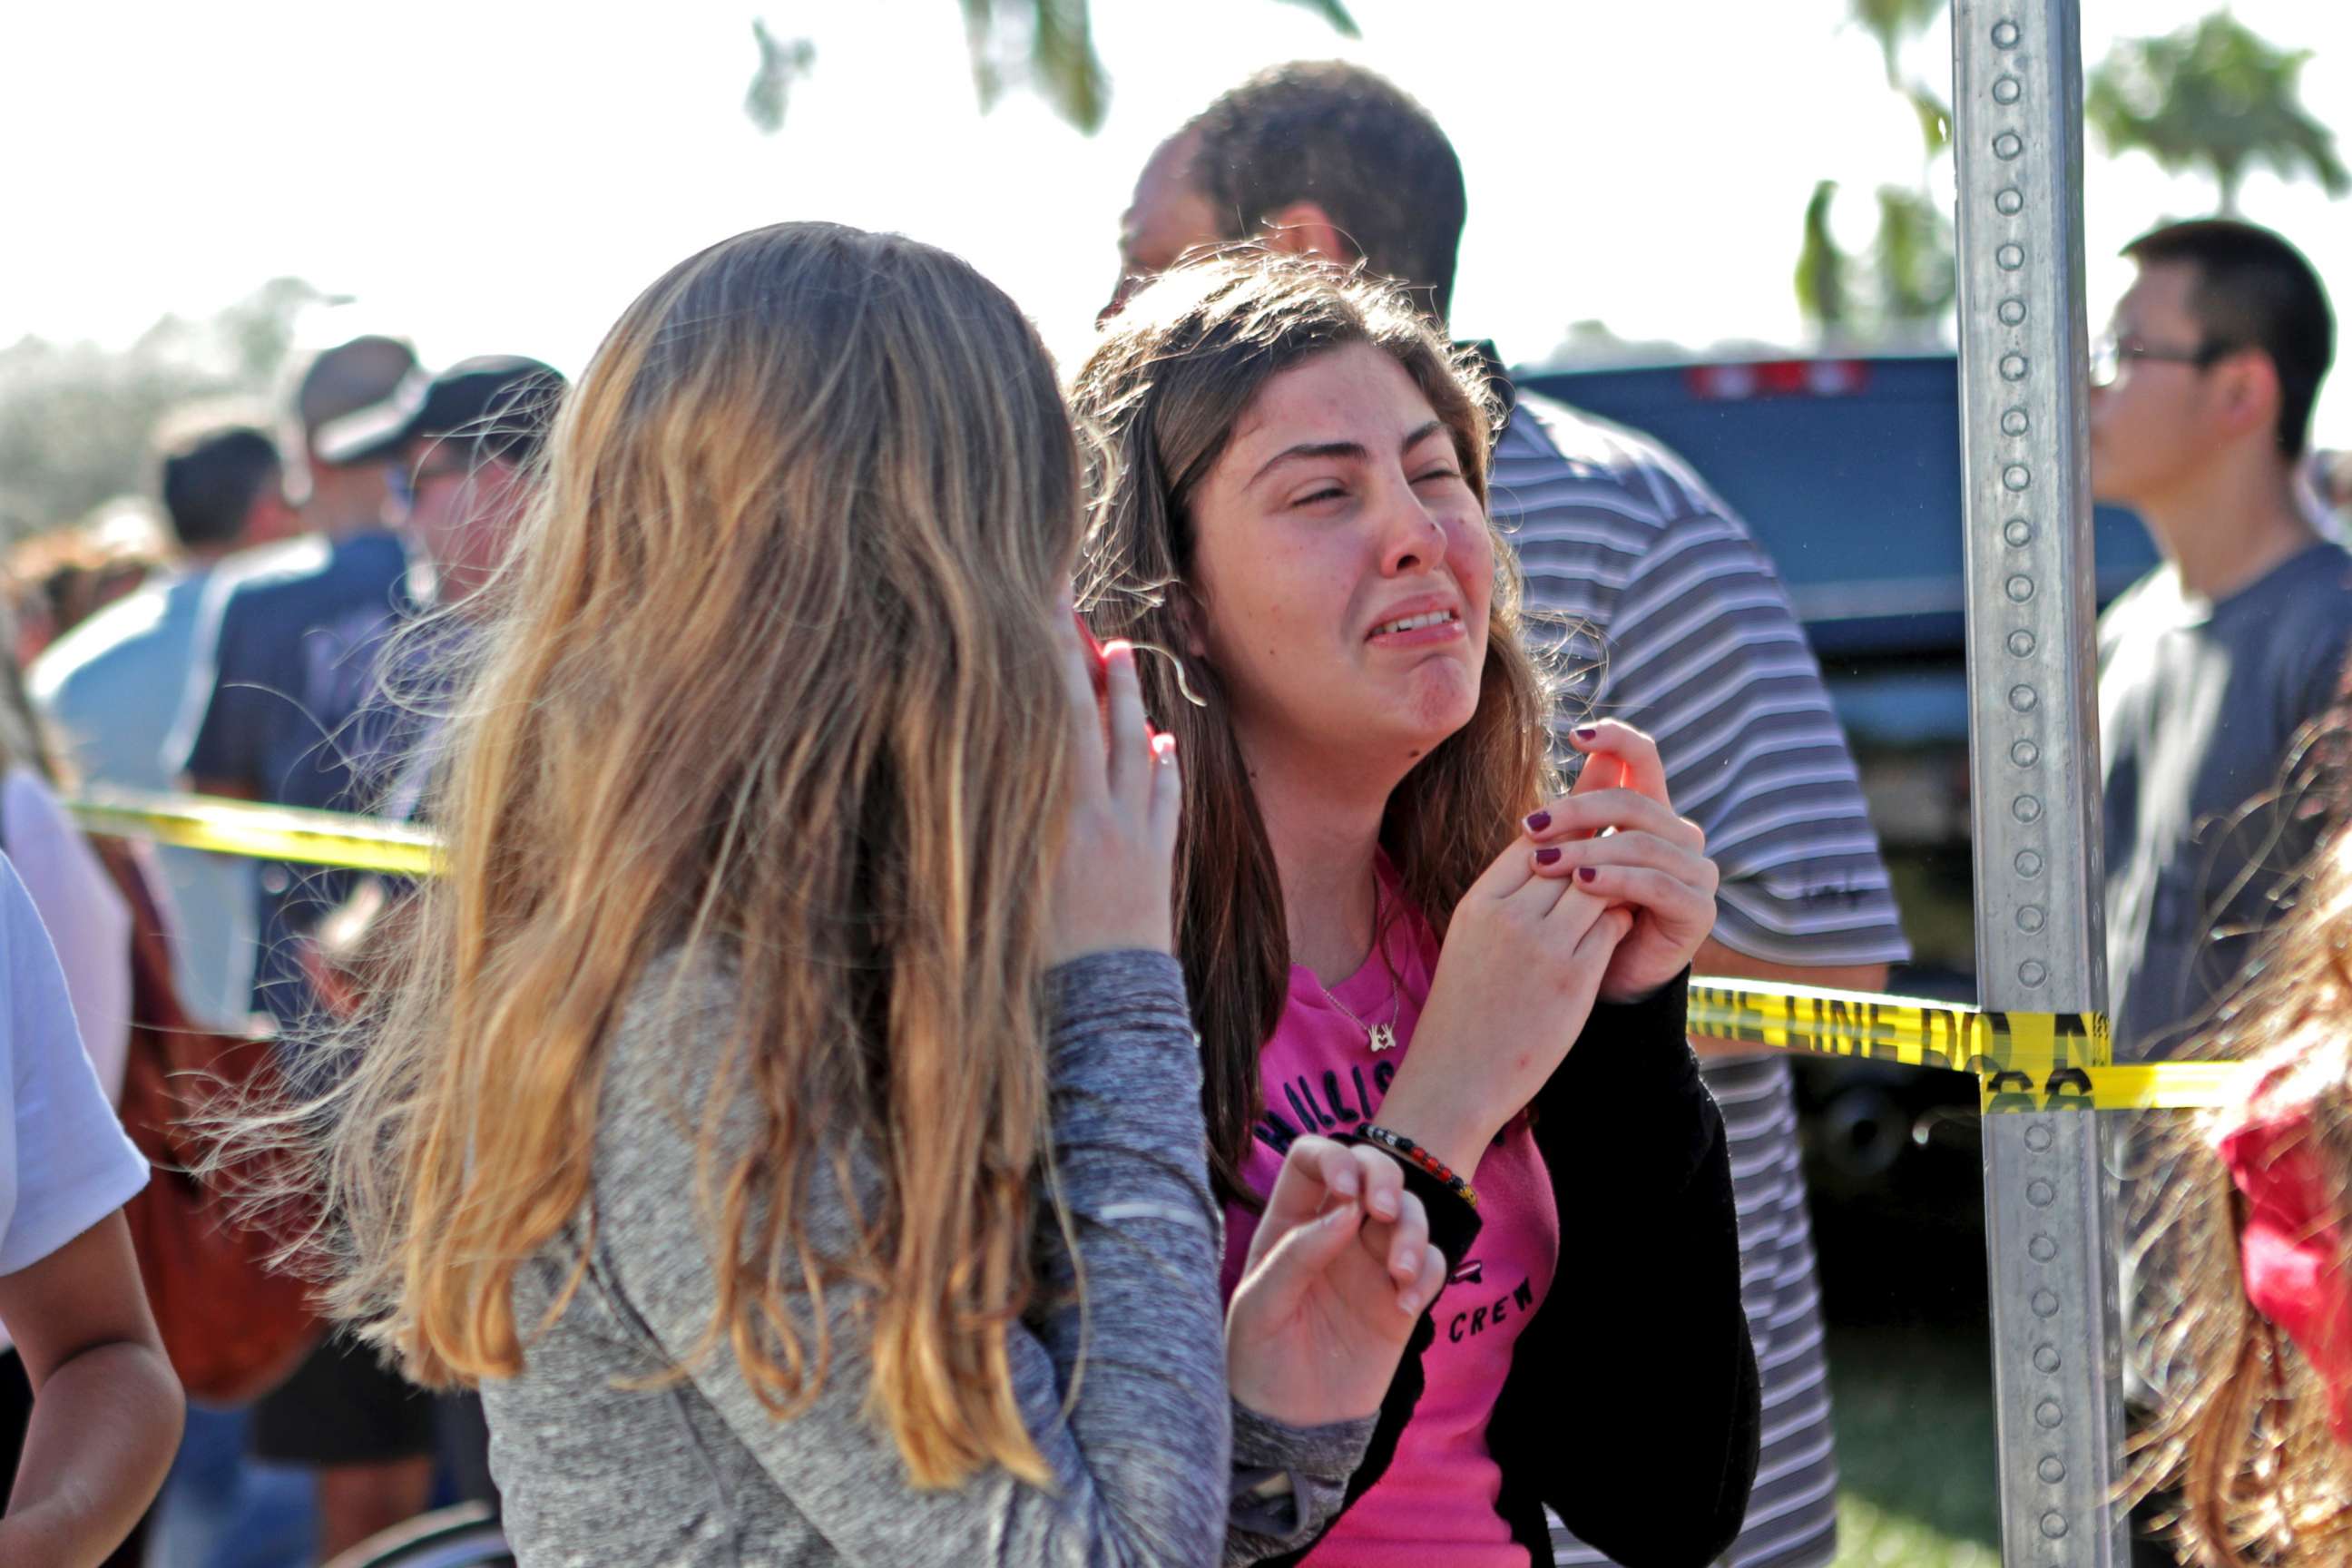 PHOTO: Students released from a lockdown are overcome with emotion following following a shooting at Marjory Stoneman Douglas High School in Parkland, Fla., Feb. 14, 2018.